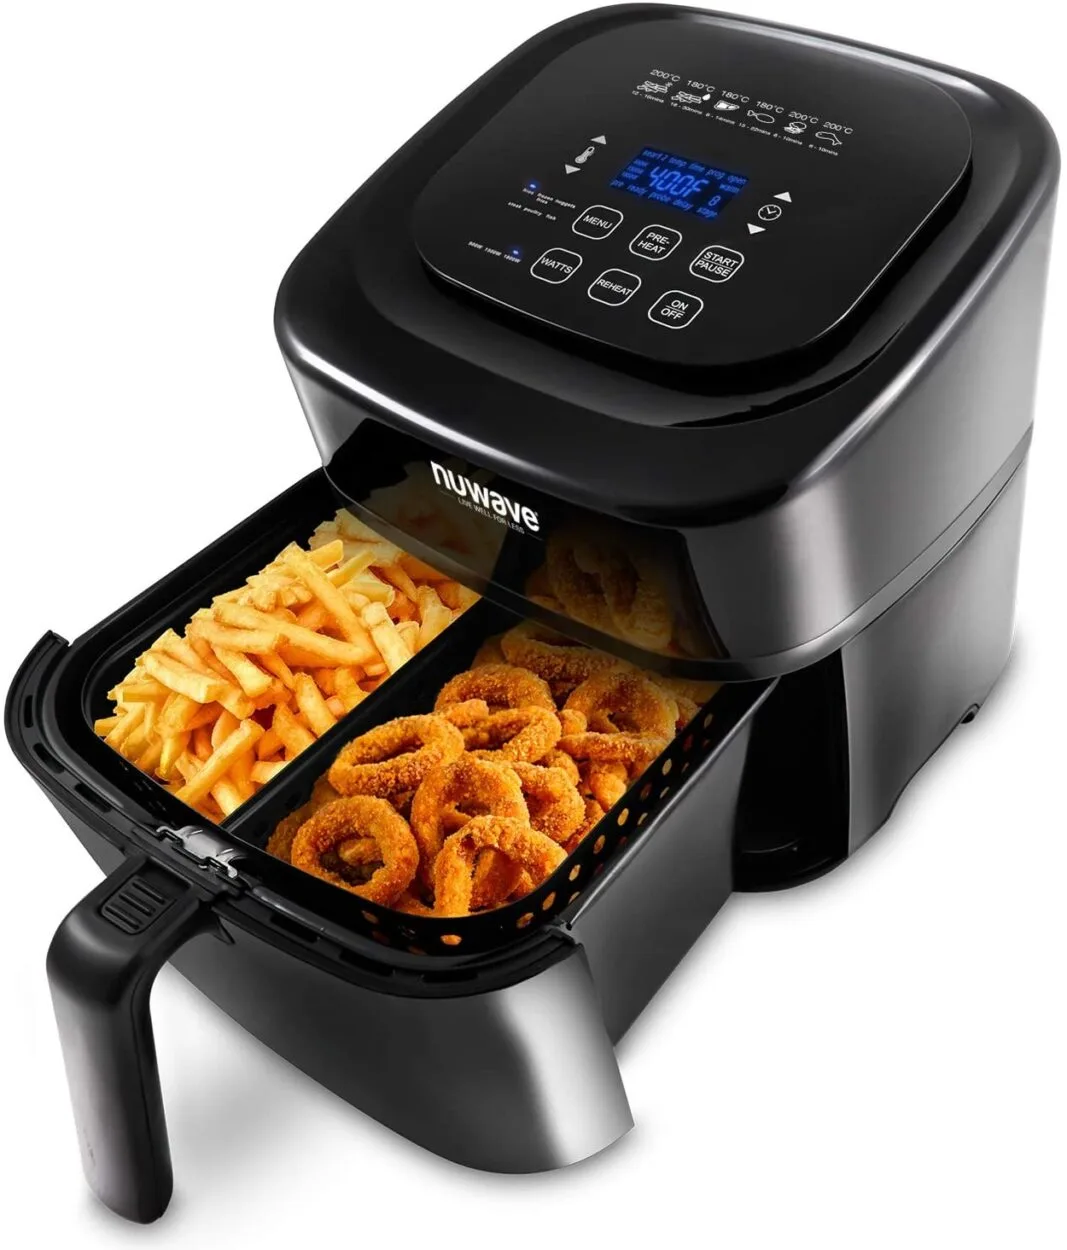 An air fryer with fries and onion rings